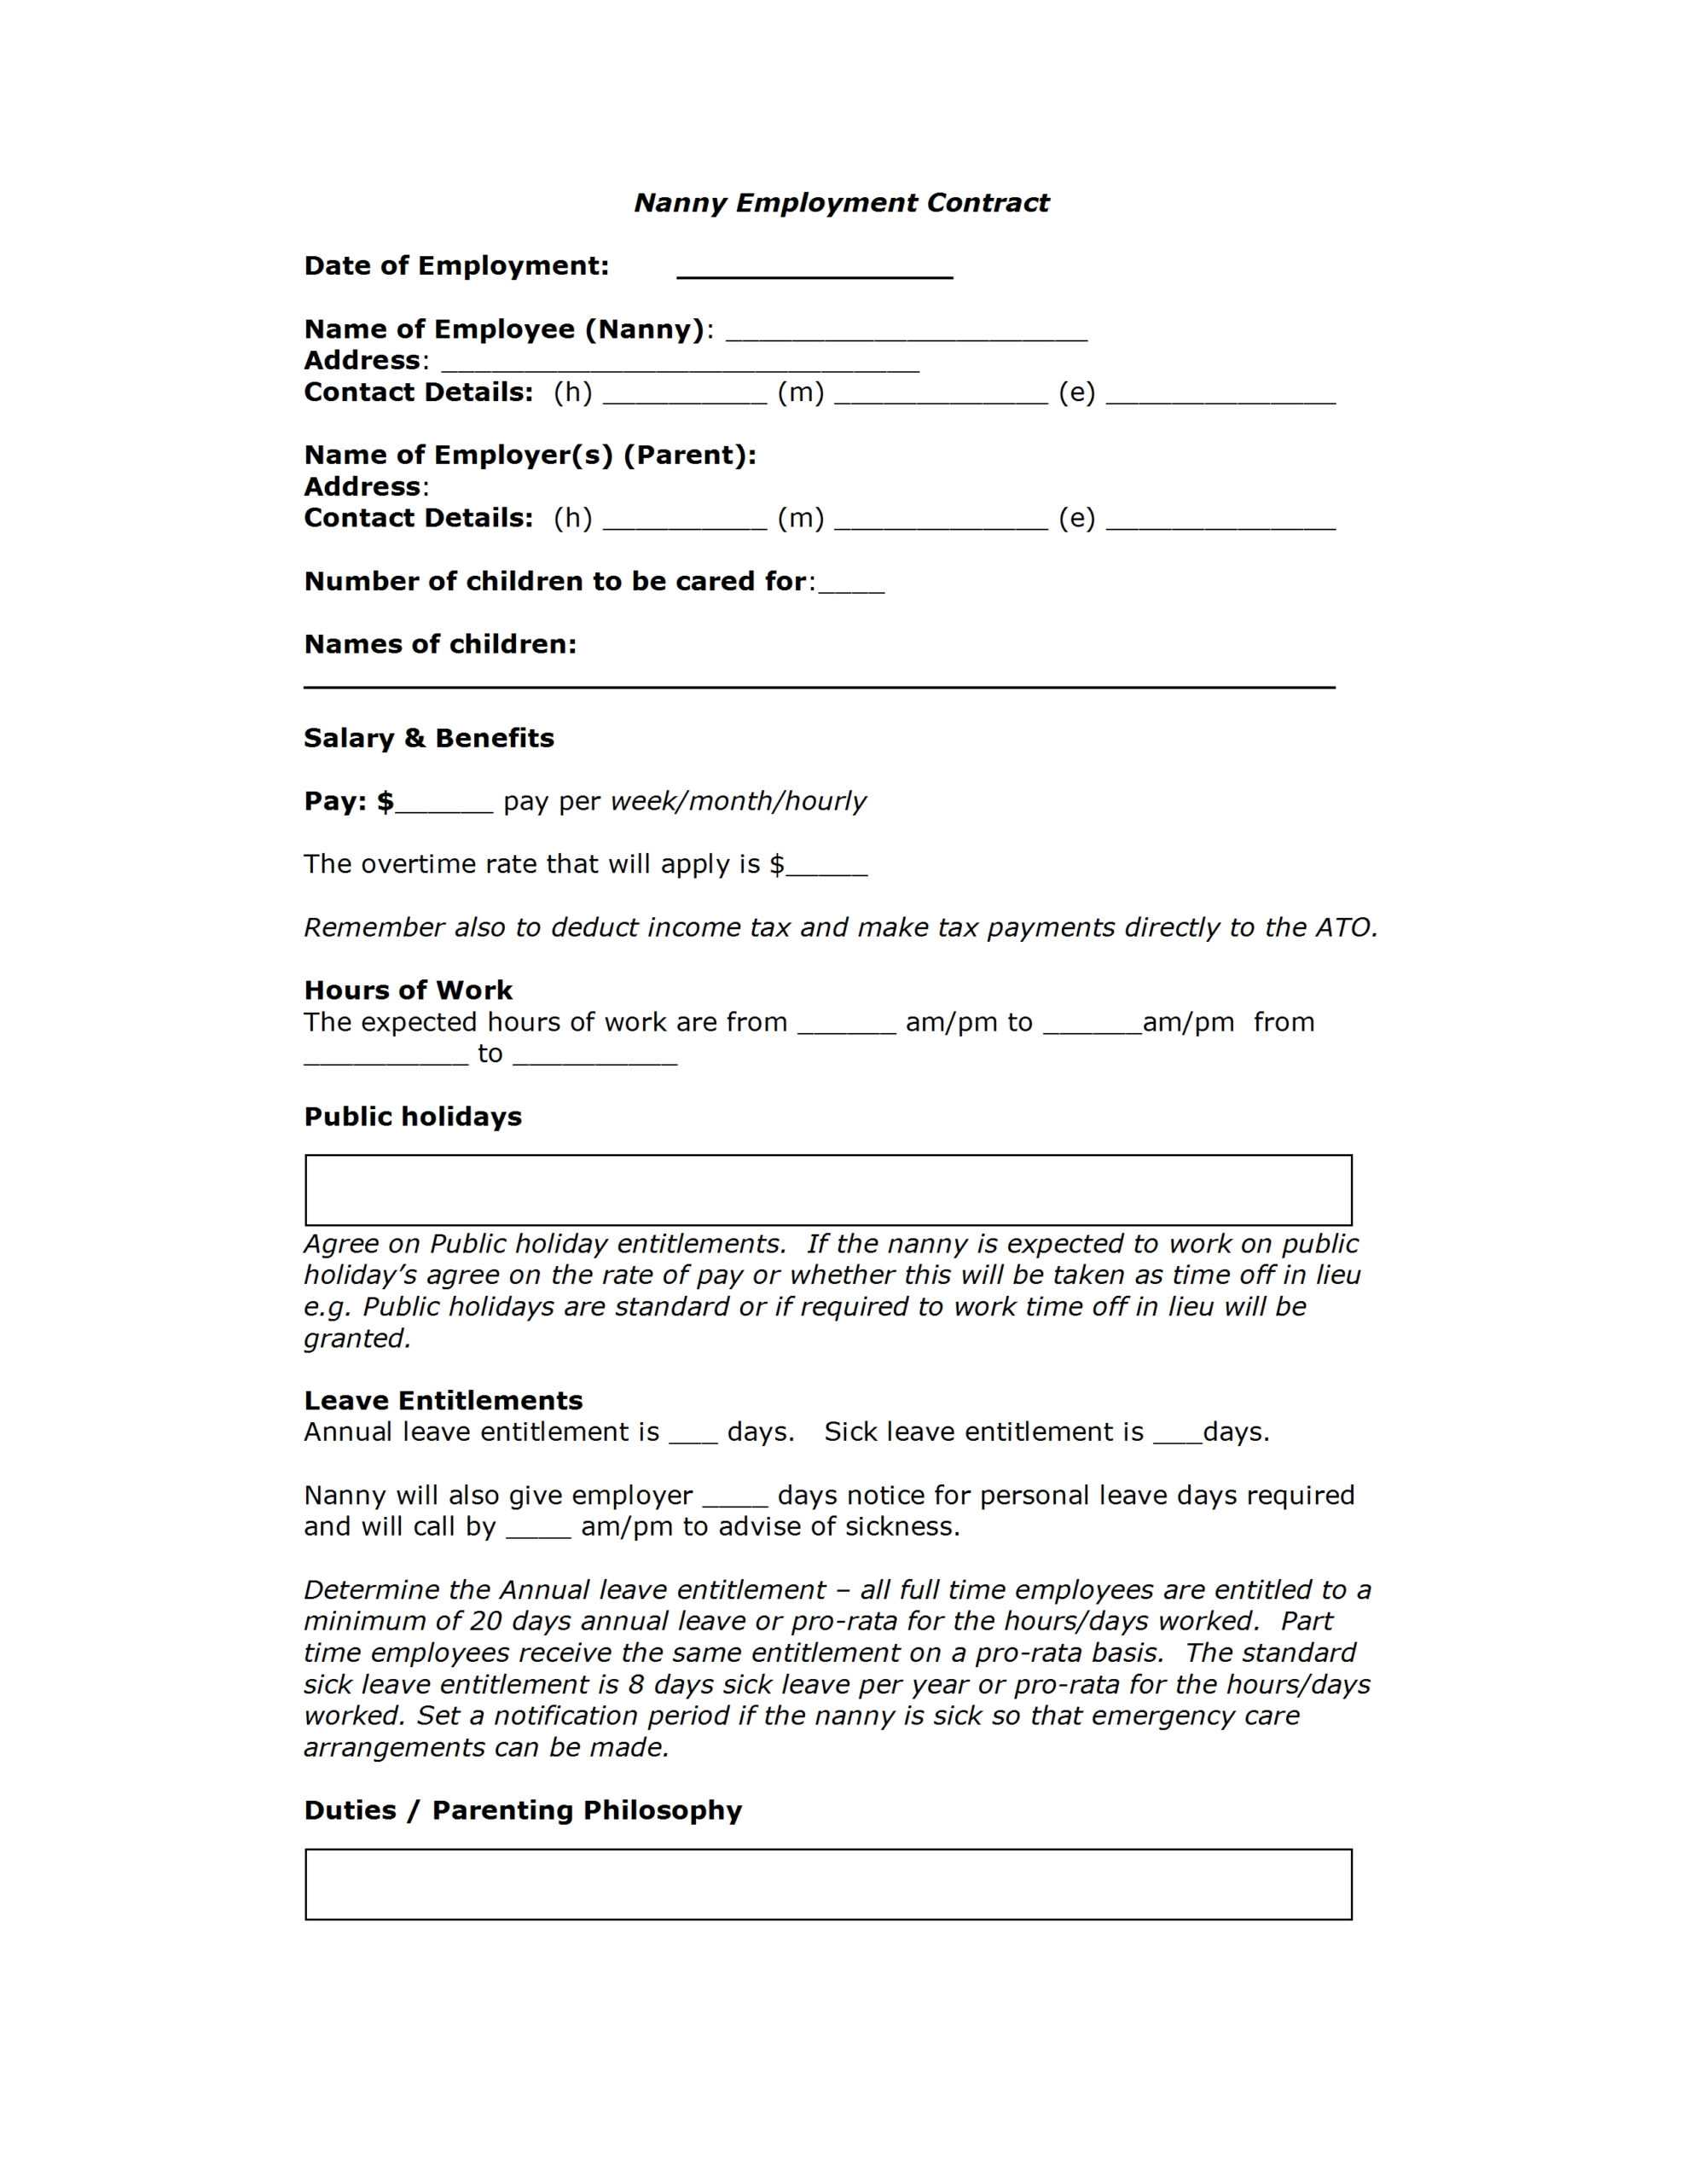 Contract Template For Nanny | Professional Resume Cv Maker Inside Nanny Contract Template Word